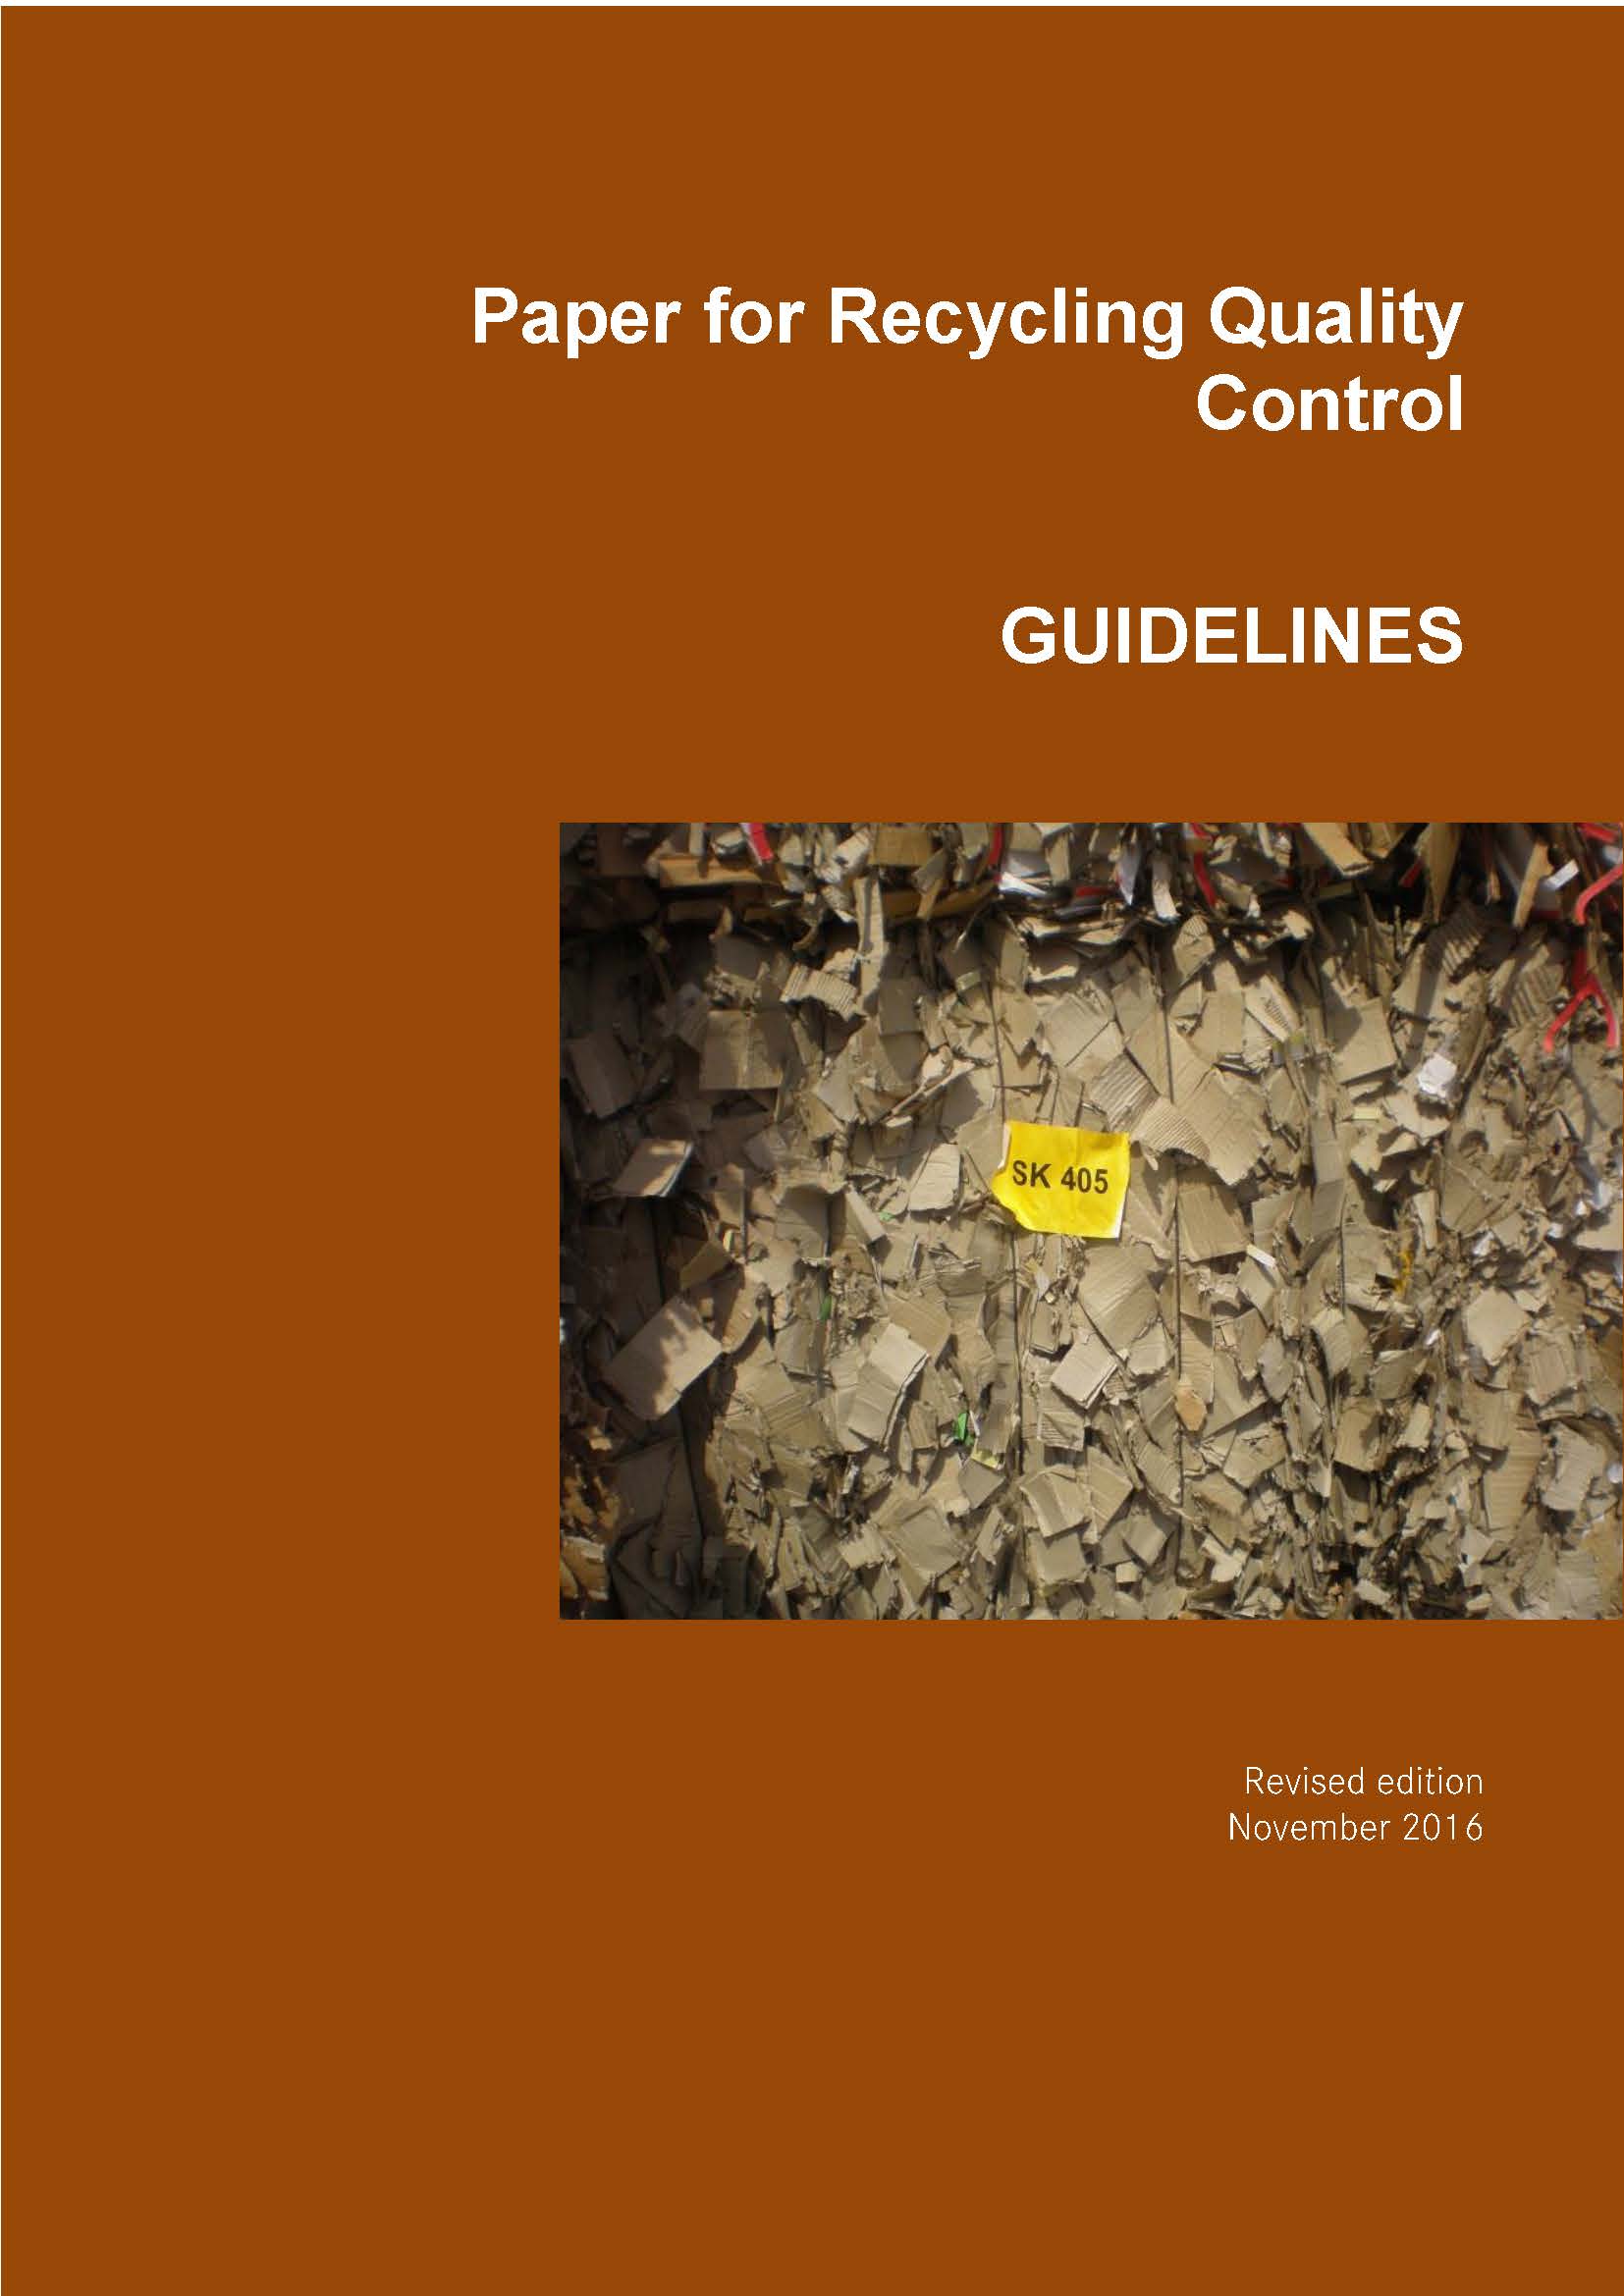 Paper for Recycling Quality Control Guidelines